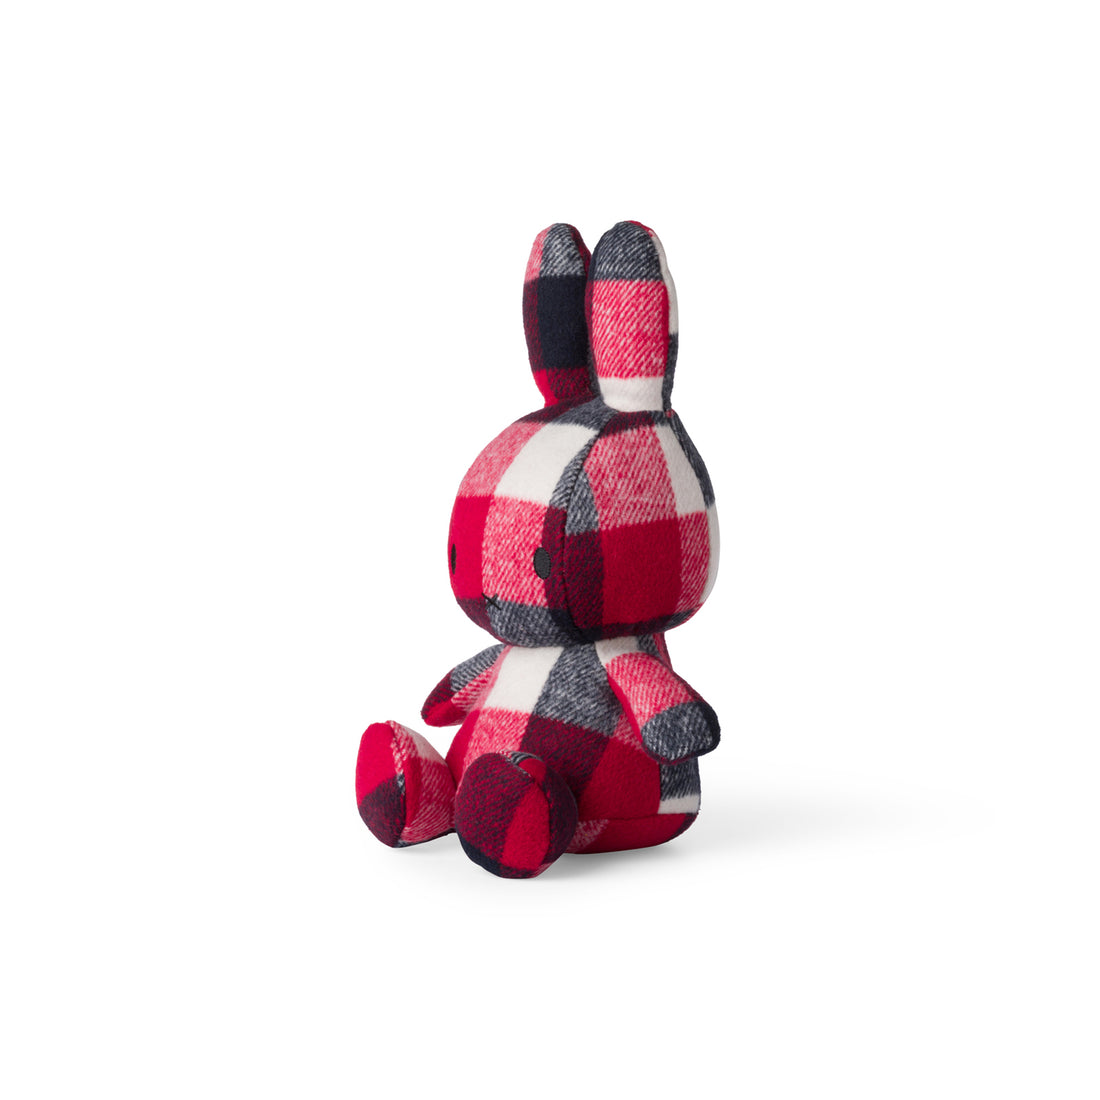 miffy-sitting-check-red-blue-33cm-miff-24182375- (2)